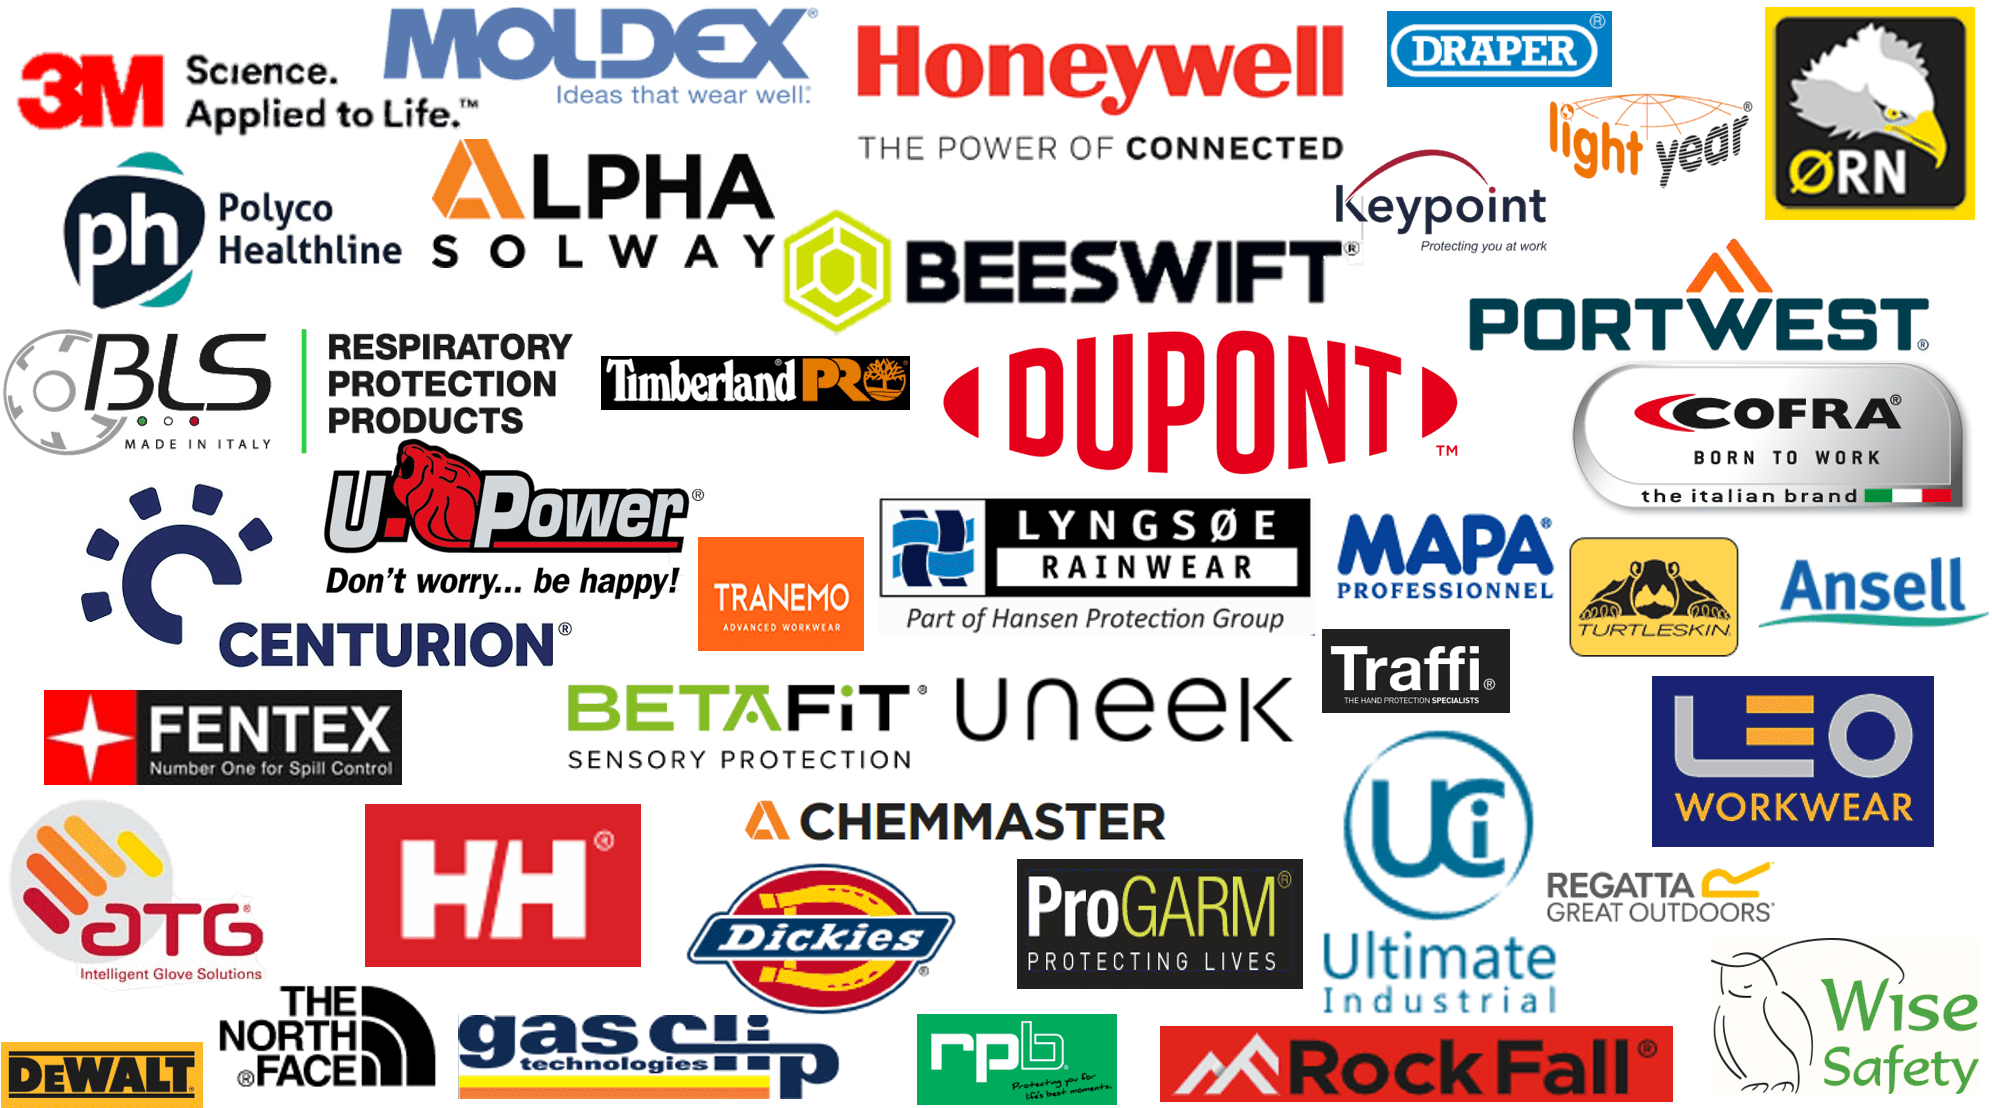 Brands We Stock at Wisesafety